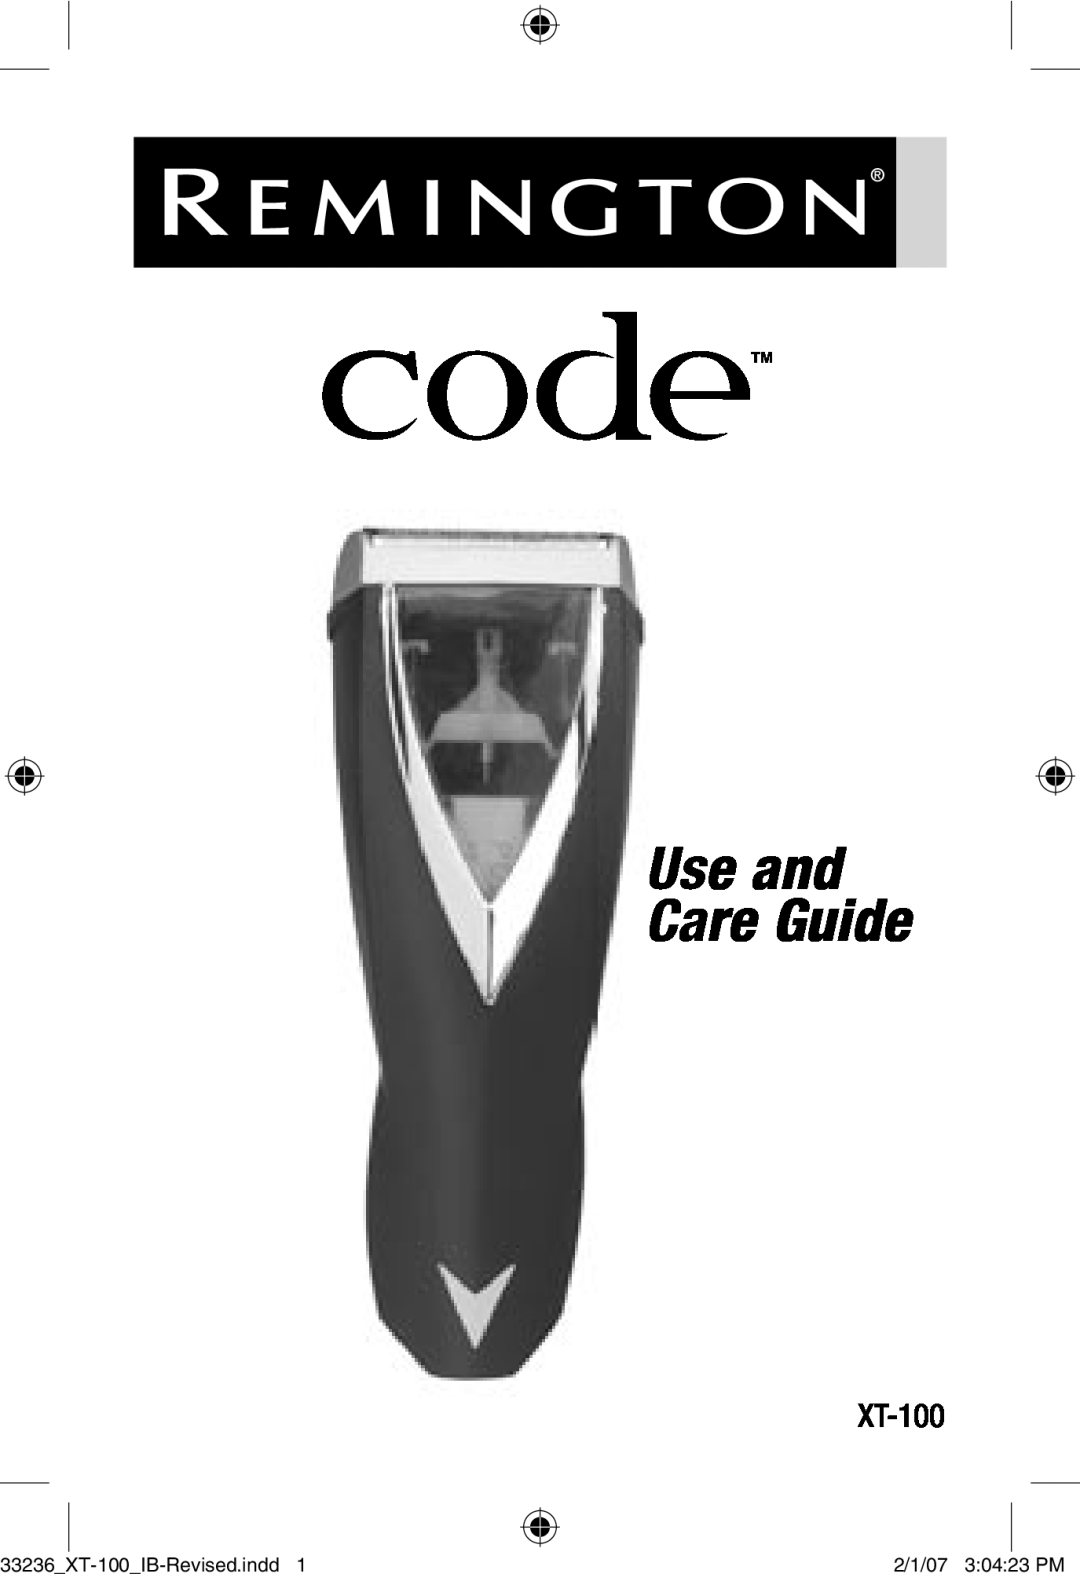 Remington Remington Code manual Use and Care Guide, 33236XT-100IB-Revised.indd, 2/1/07 30423 PM 